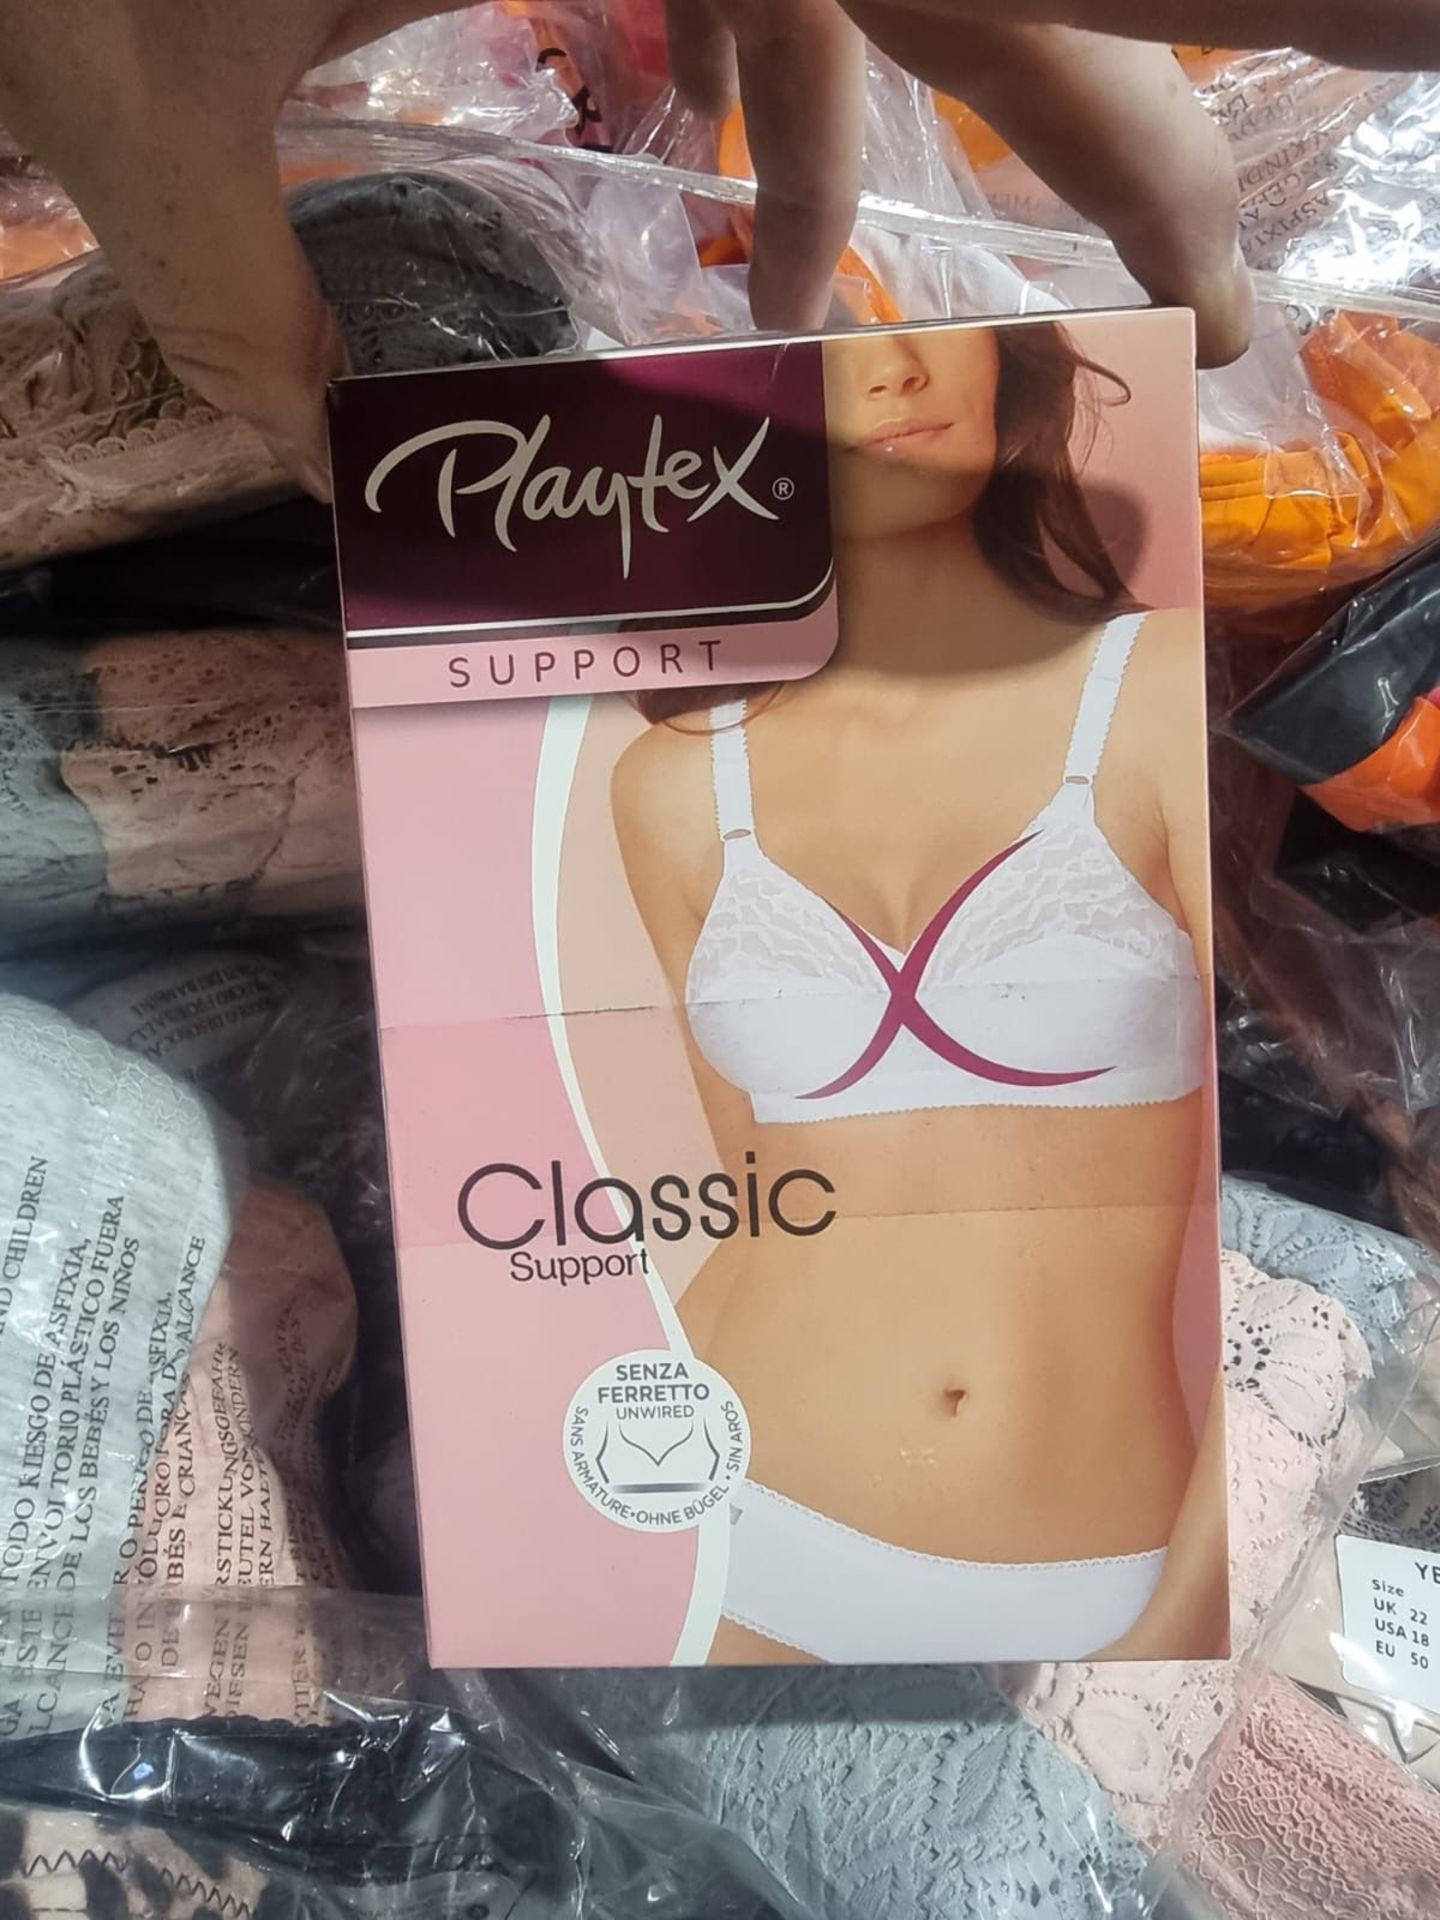 100 x NEW PACKAGED ASSORTED SWIM & UNDERWEAR FROM BRAND SUCH AS WONDERBRA, BOUX AVENUE, ANN SUMMERS, - Image 19 of 53